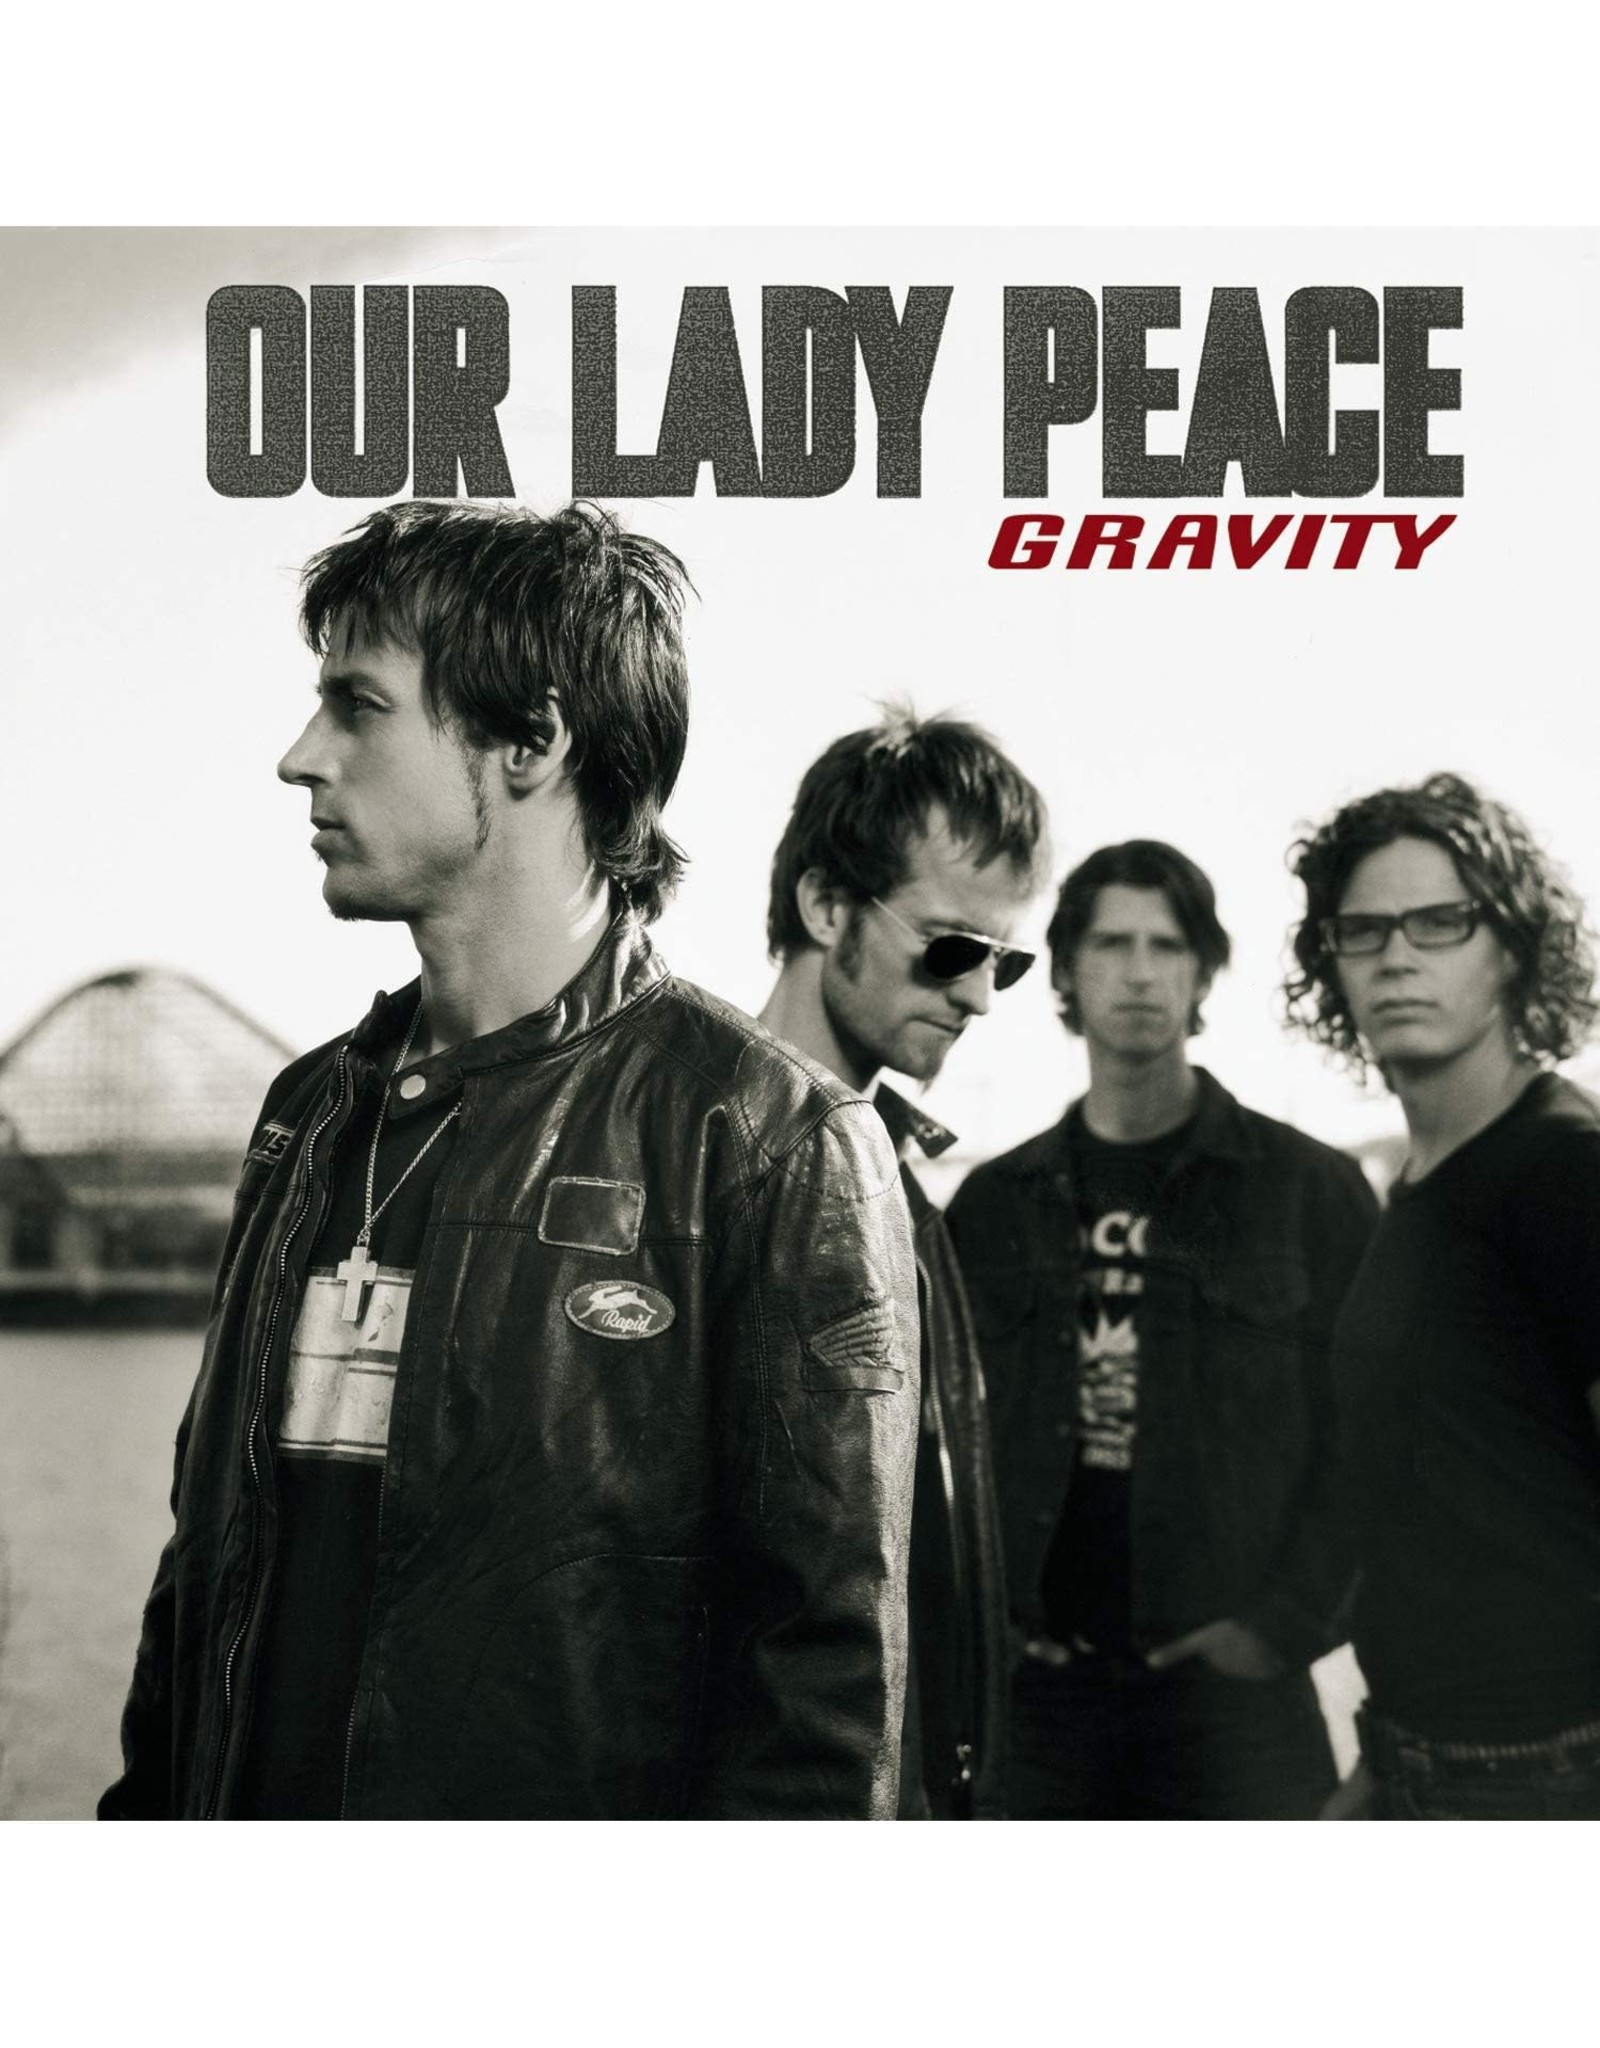 Our Lady Peace - Gravity (Exclusive Red Vinyl)